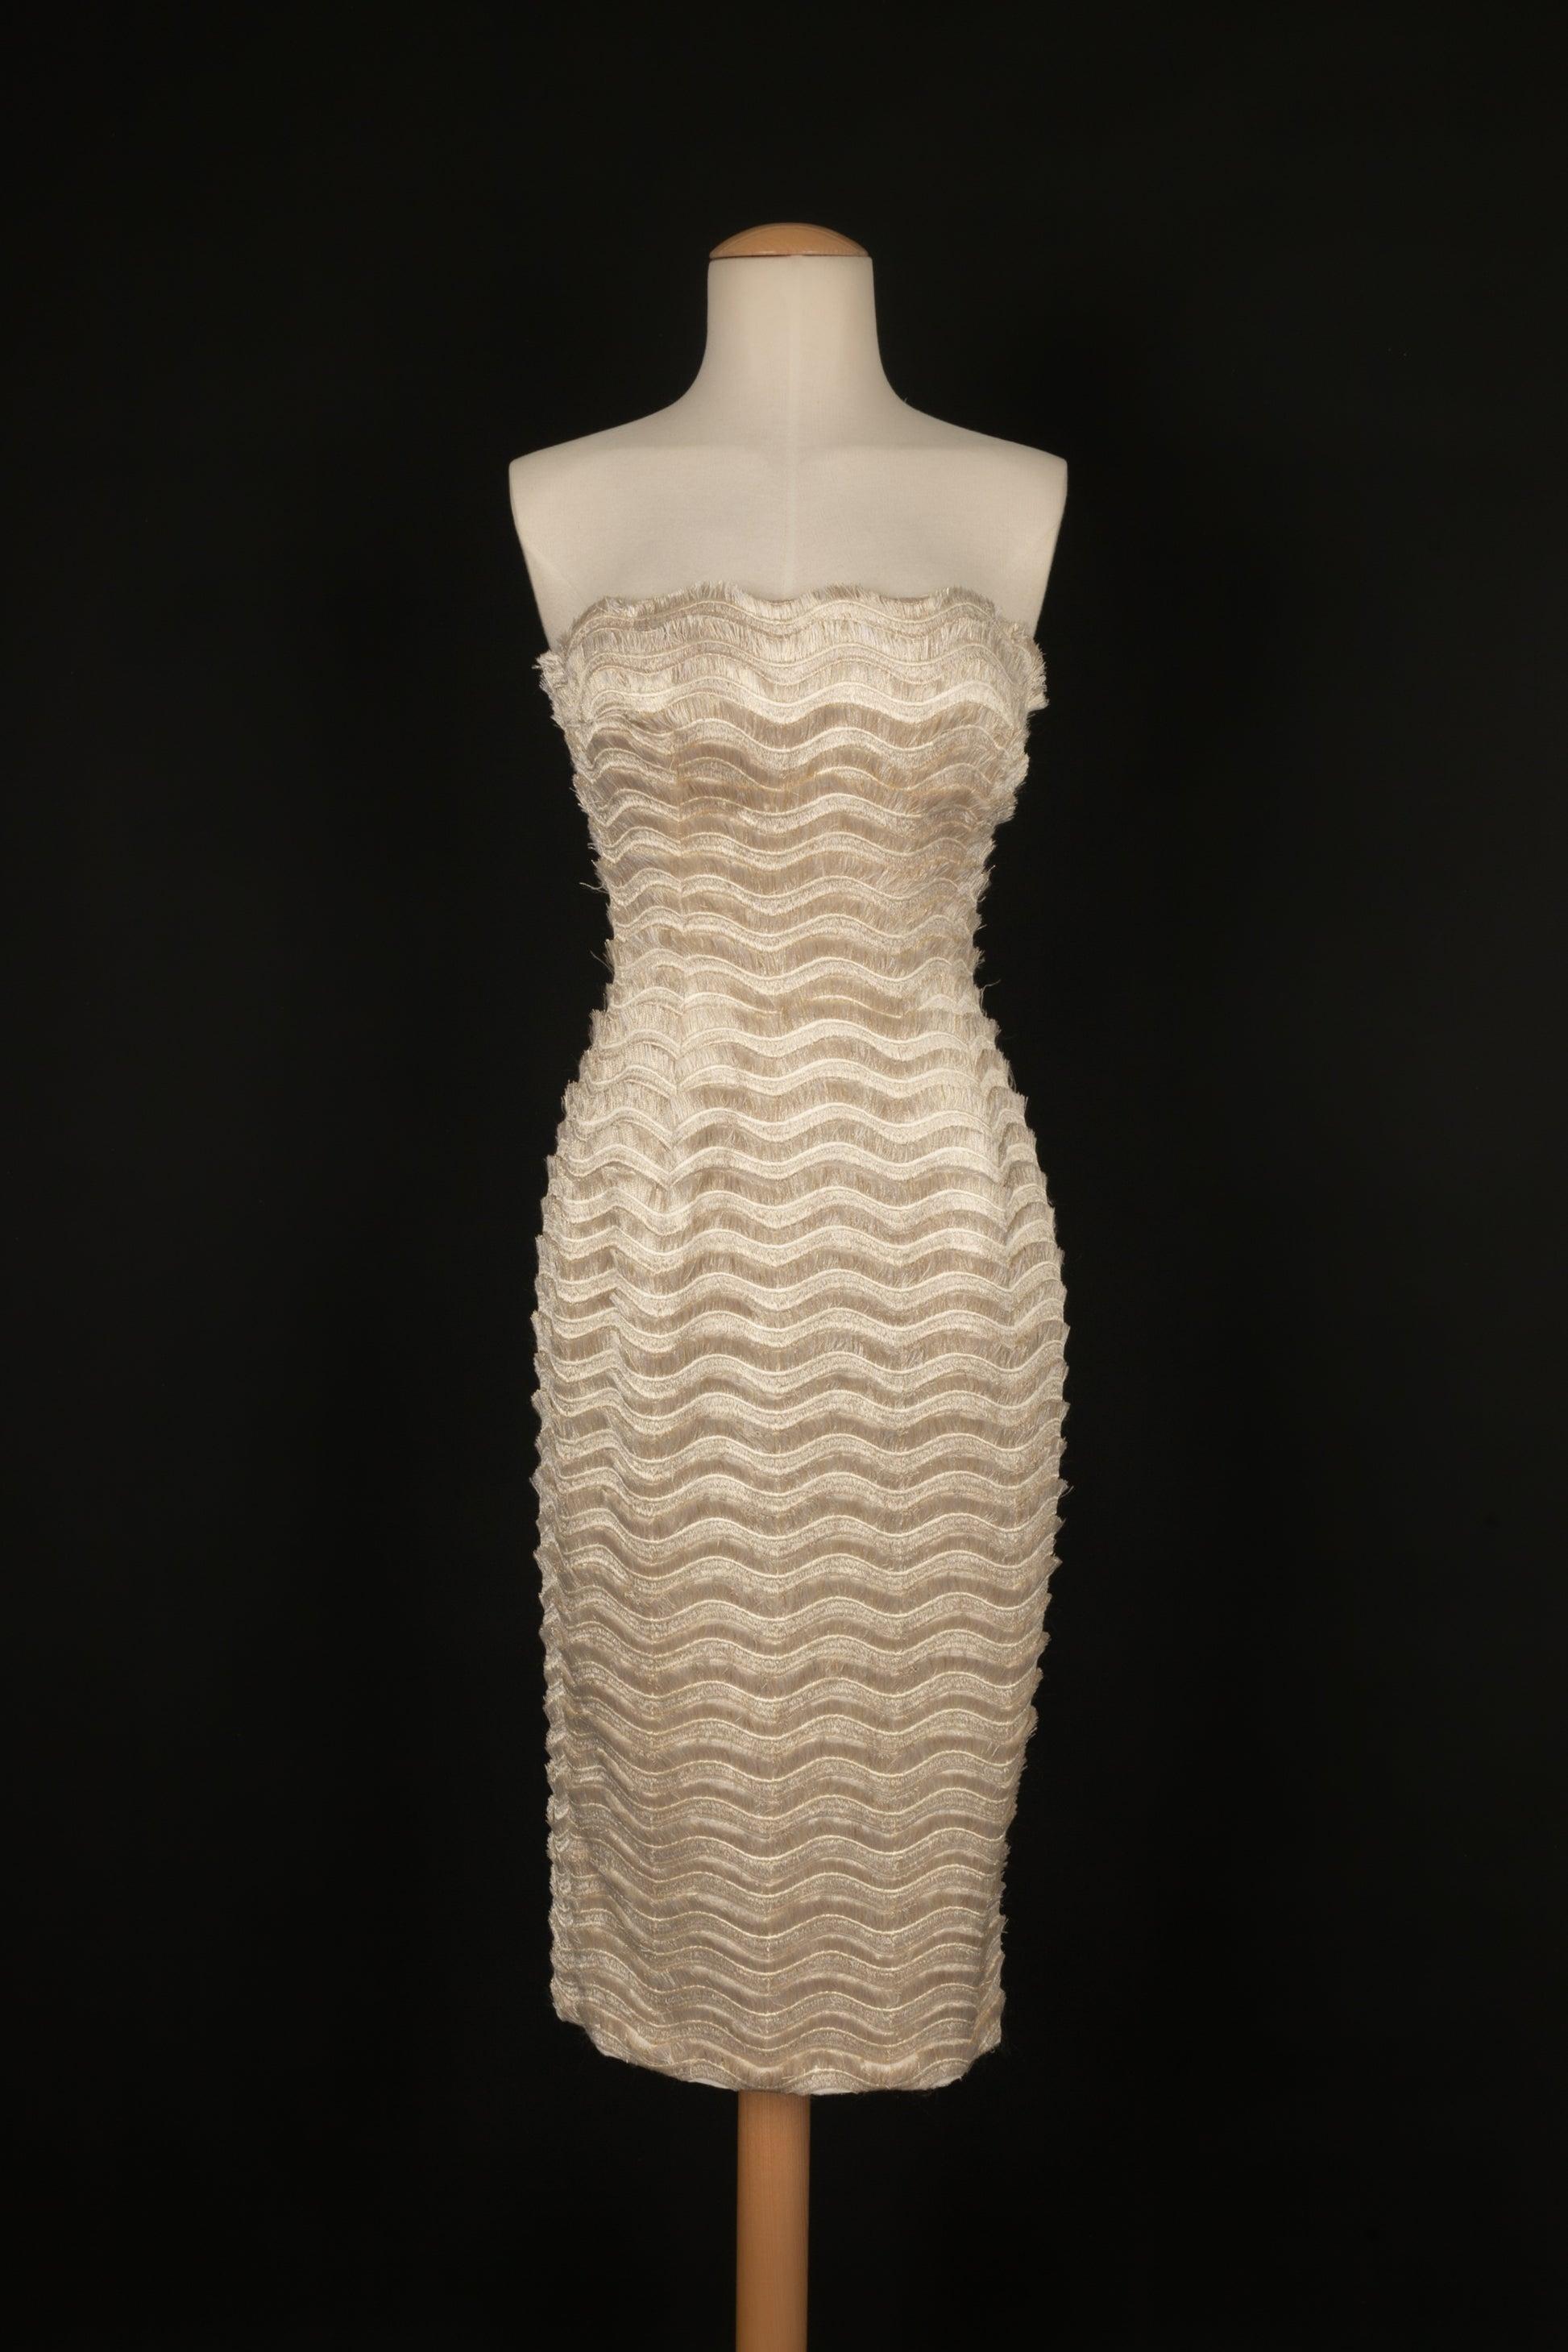 Givenchy - (Made in France) Strapless dress strew with golden lurex fringes. The dress is sold with a matching bag. No size nor composition label, it fits a 36FR. Spring-Summer 1997 Haute Couture Collection.

Additional information:
Condition: Very